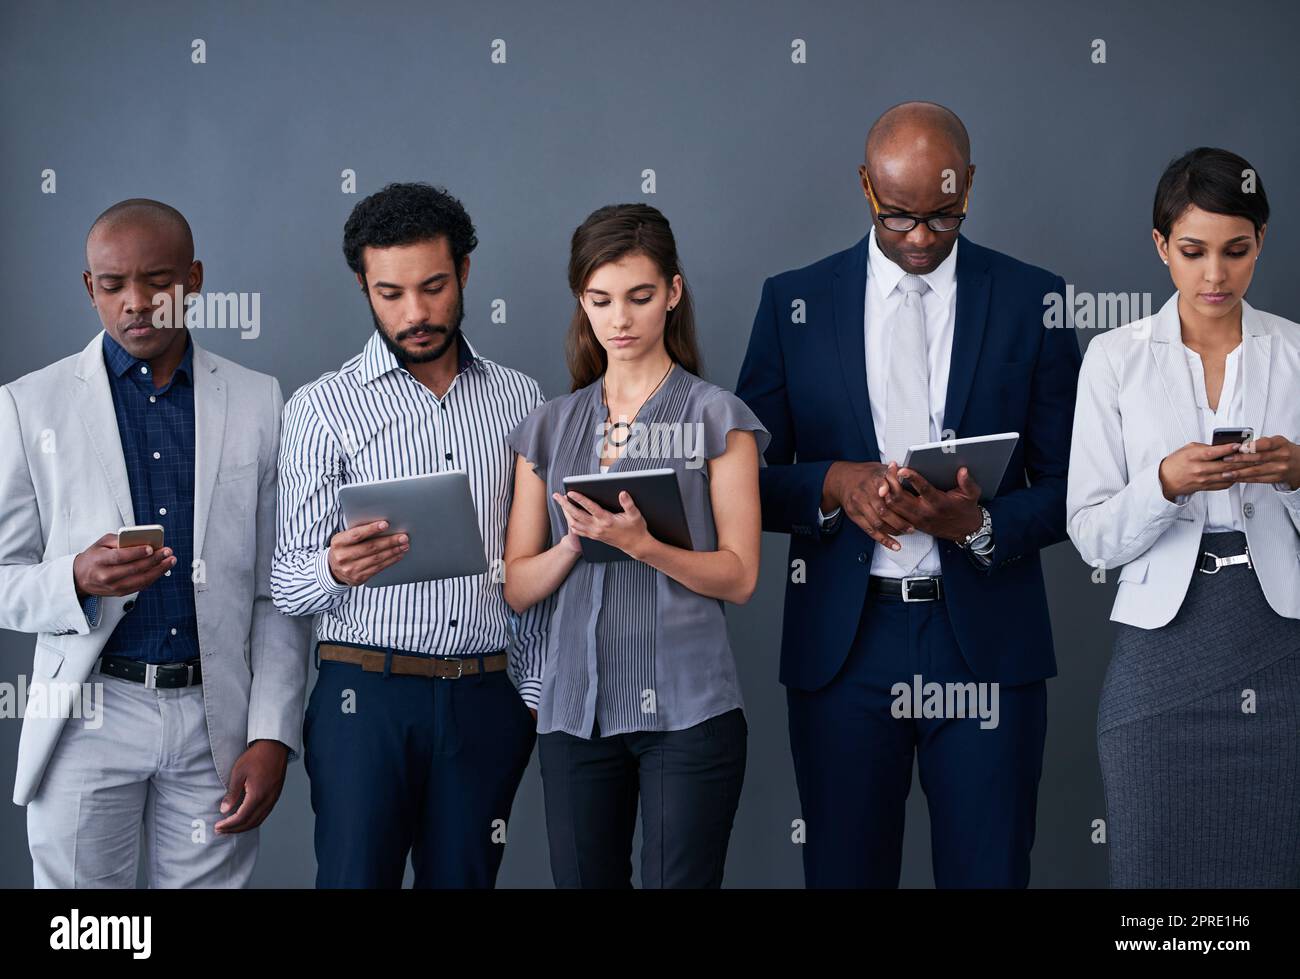 Catching up on some business while we wait. Studio shot of a group of corporate businesspeople using different devices against a gray background. Stock Photo